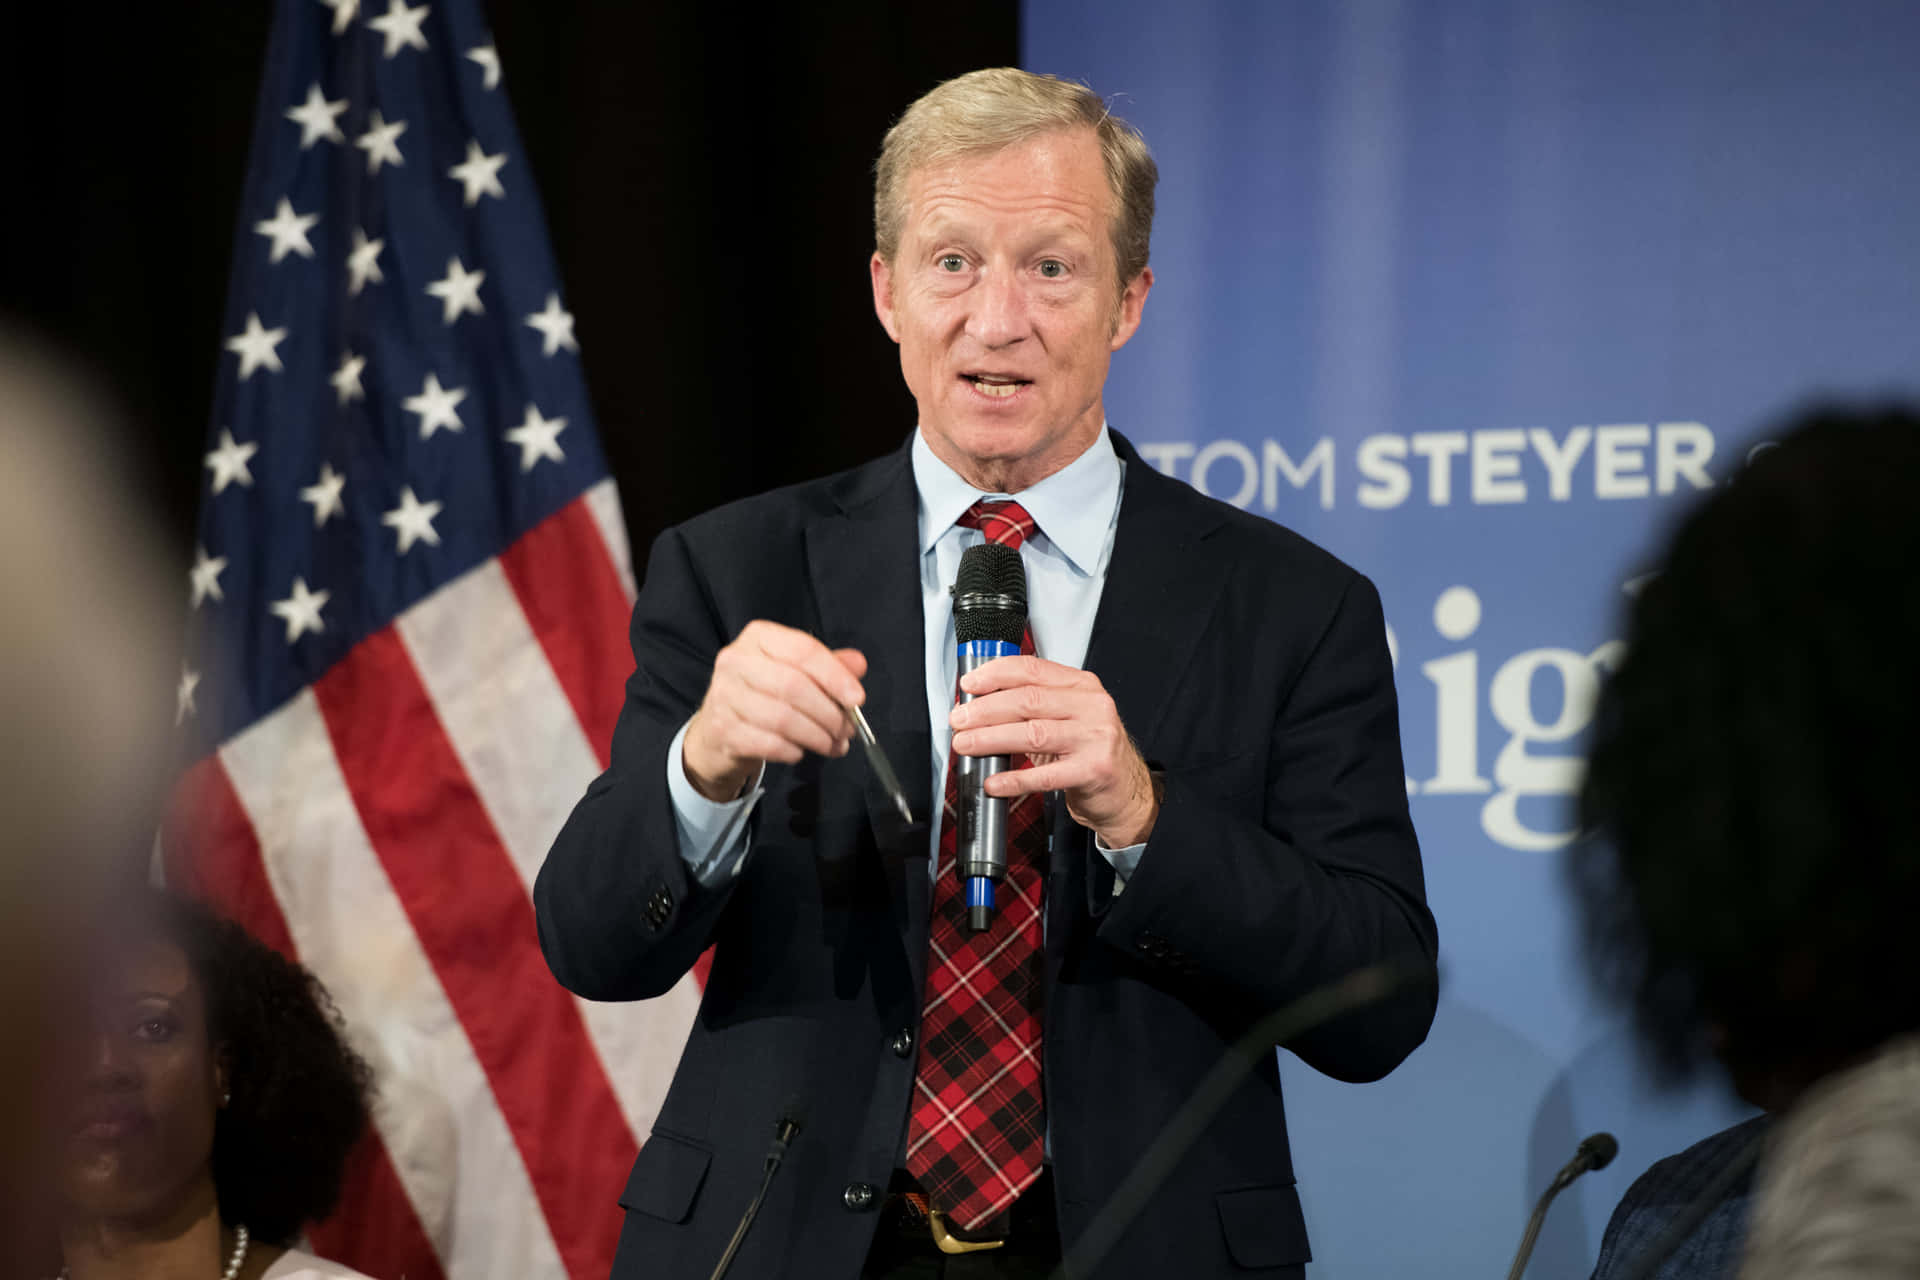 Tom Steyer Holding A Microphone Wallpaper